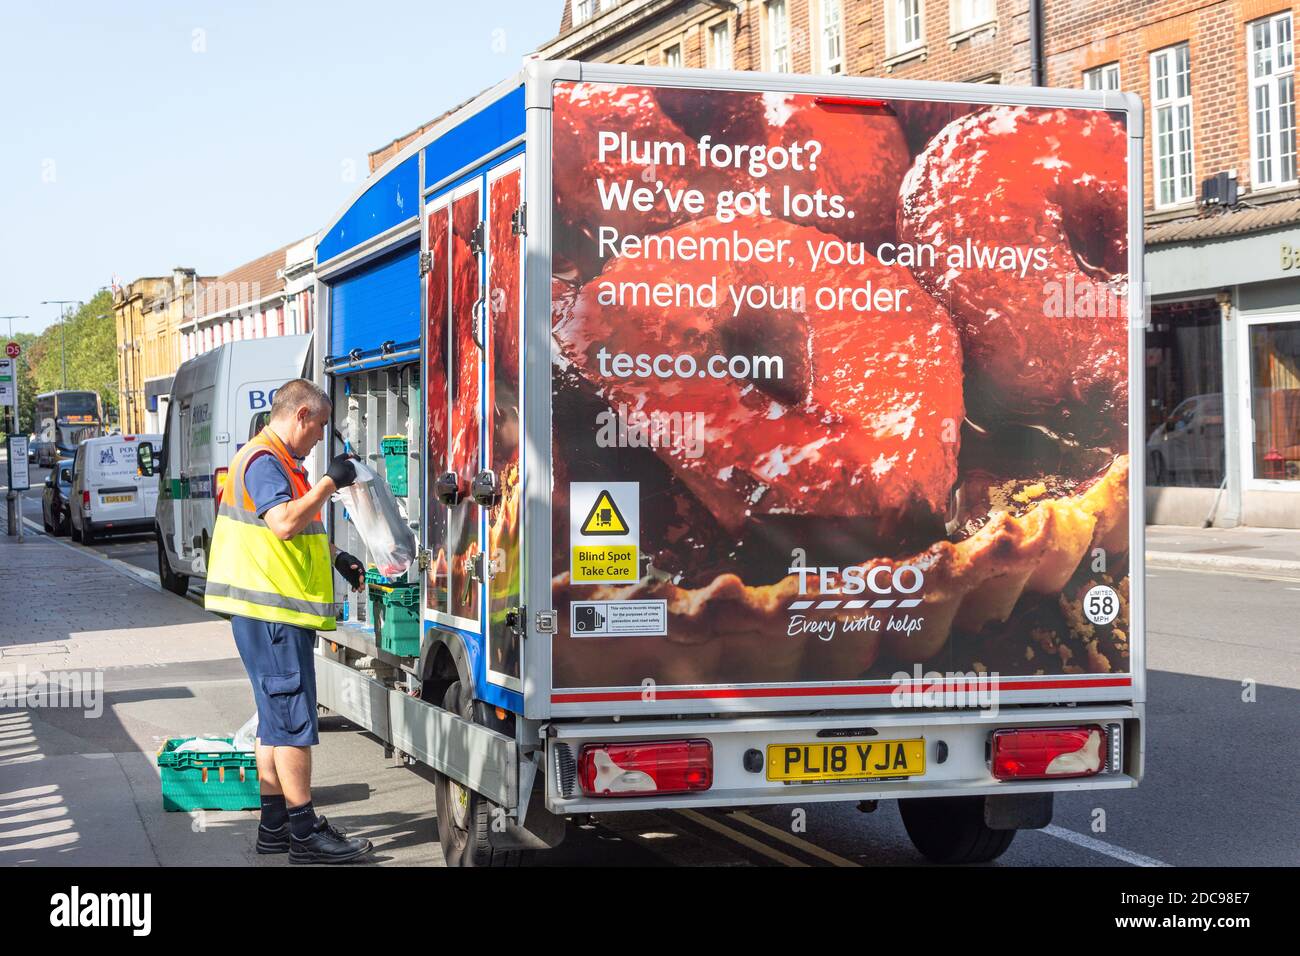 Tesco home food delivery van, New Road, Oxford, Oxfordshire, England, United Kingdom Stock Photo